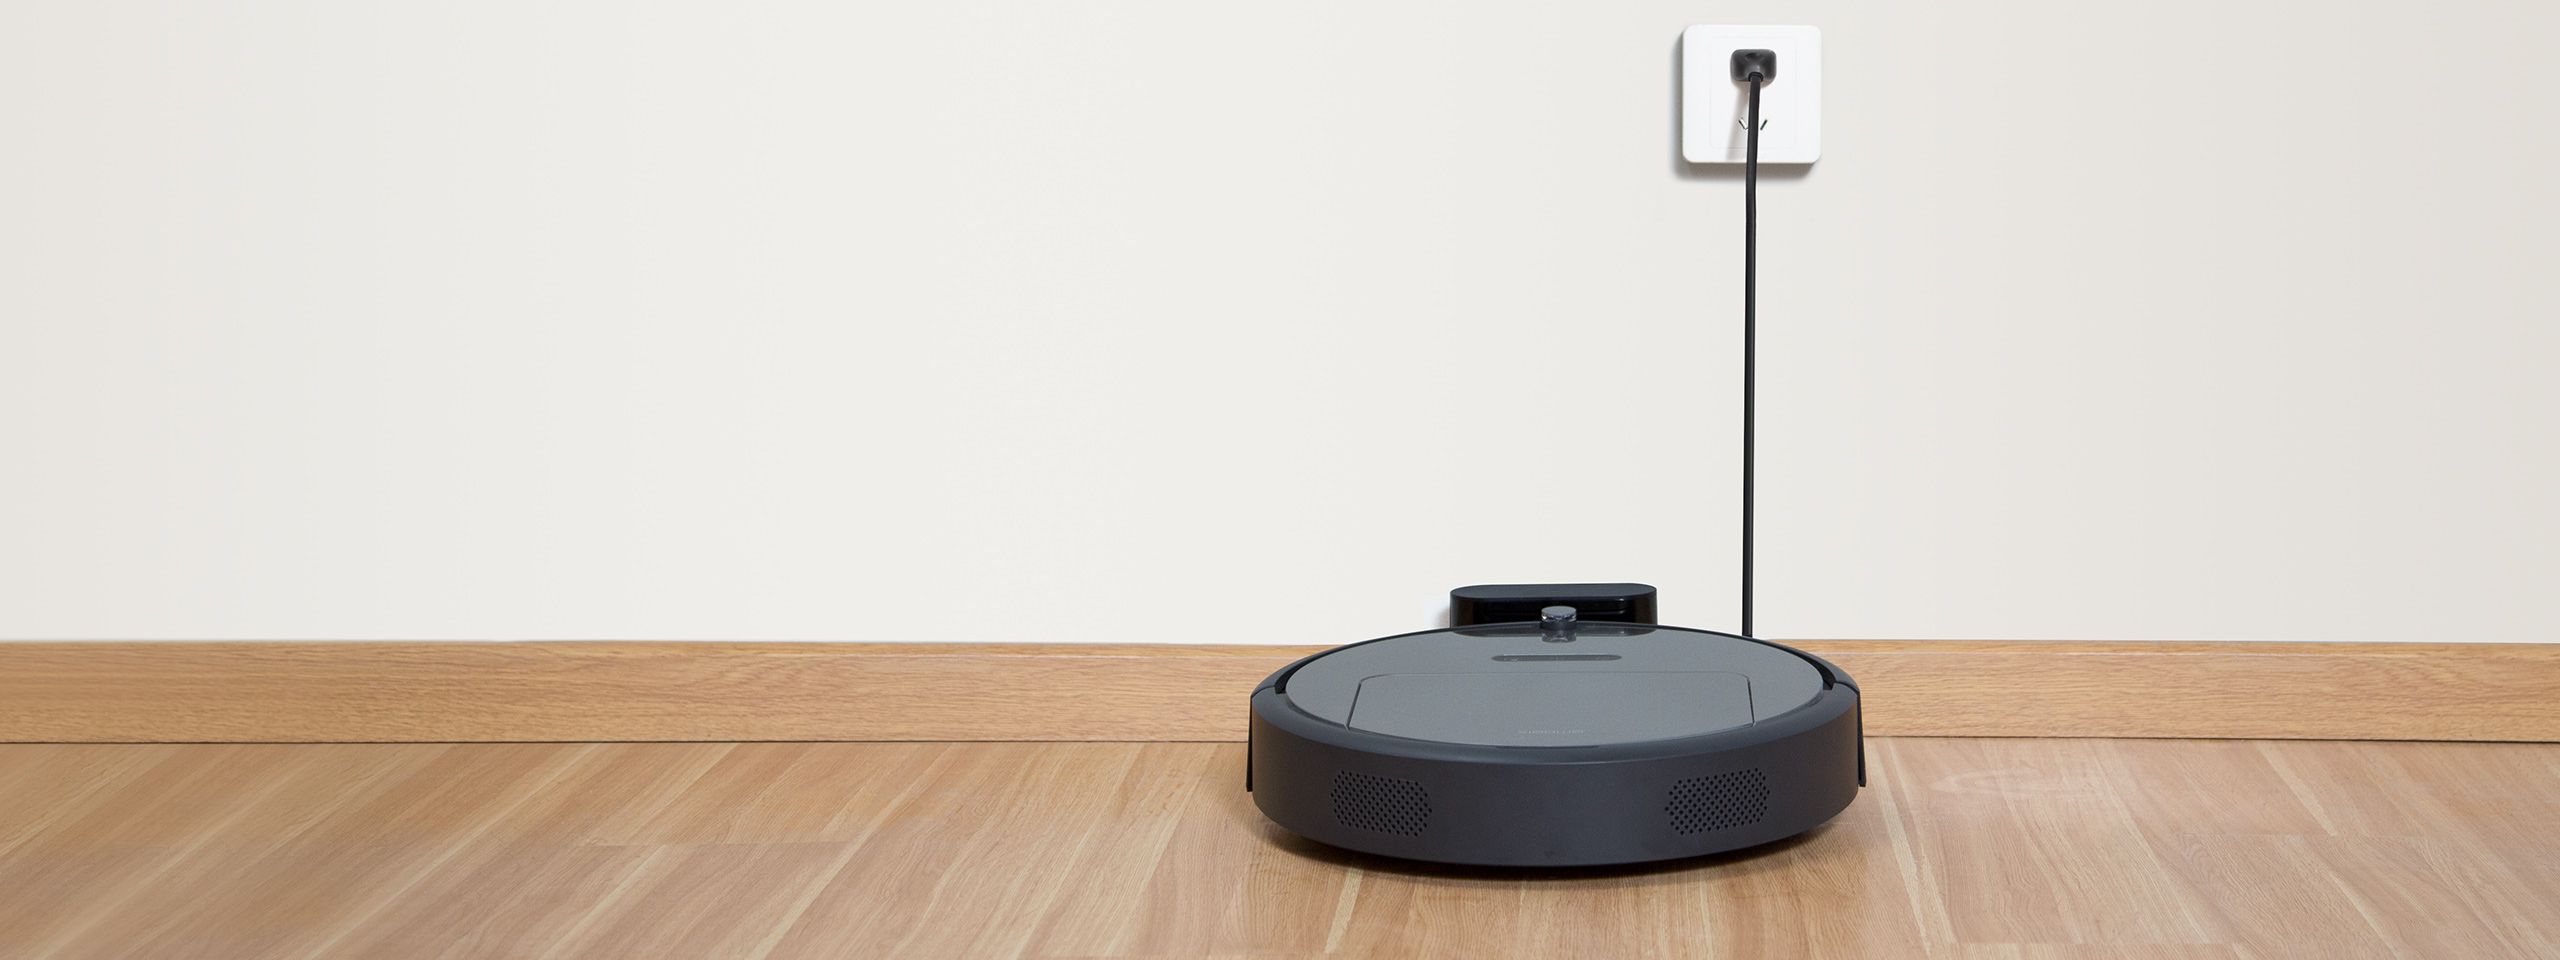 Thinking of buying a robot vacuum the Roborock E35is ideal image 3